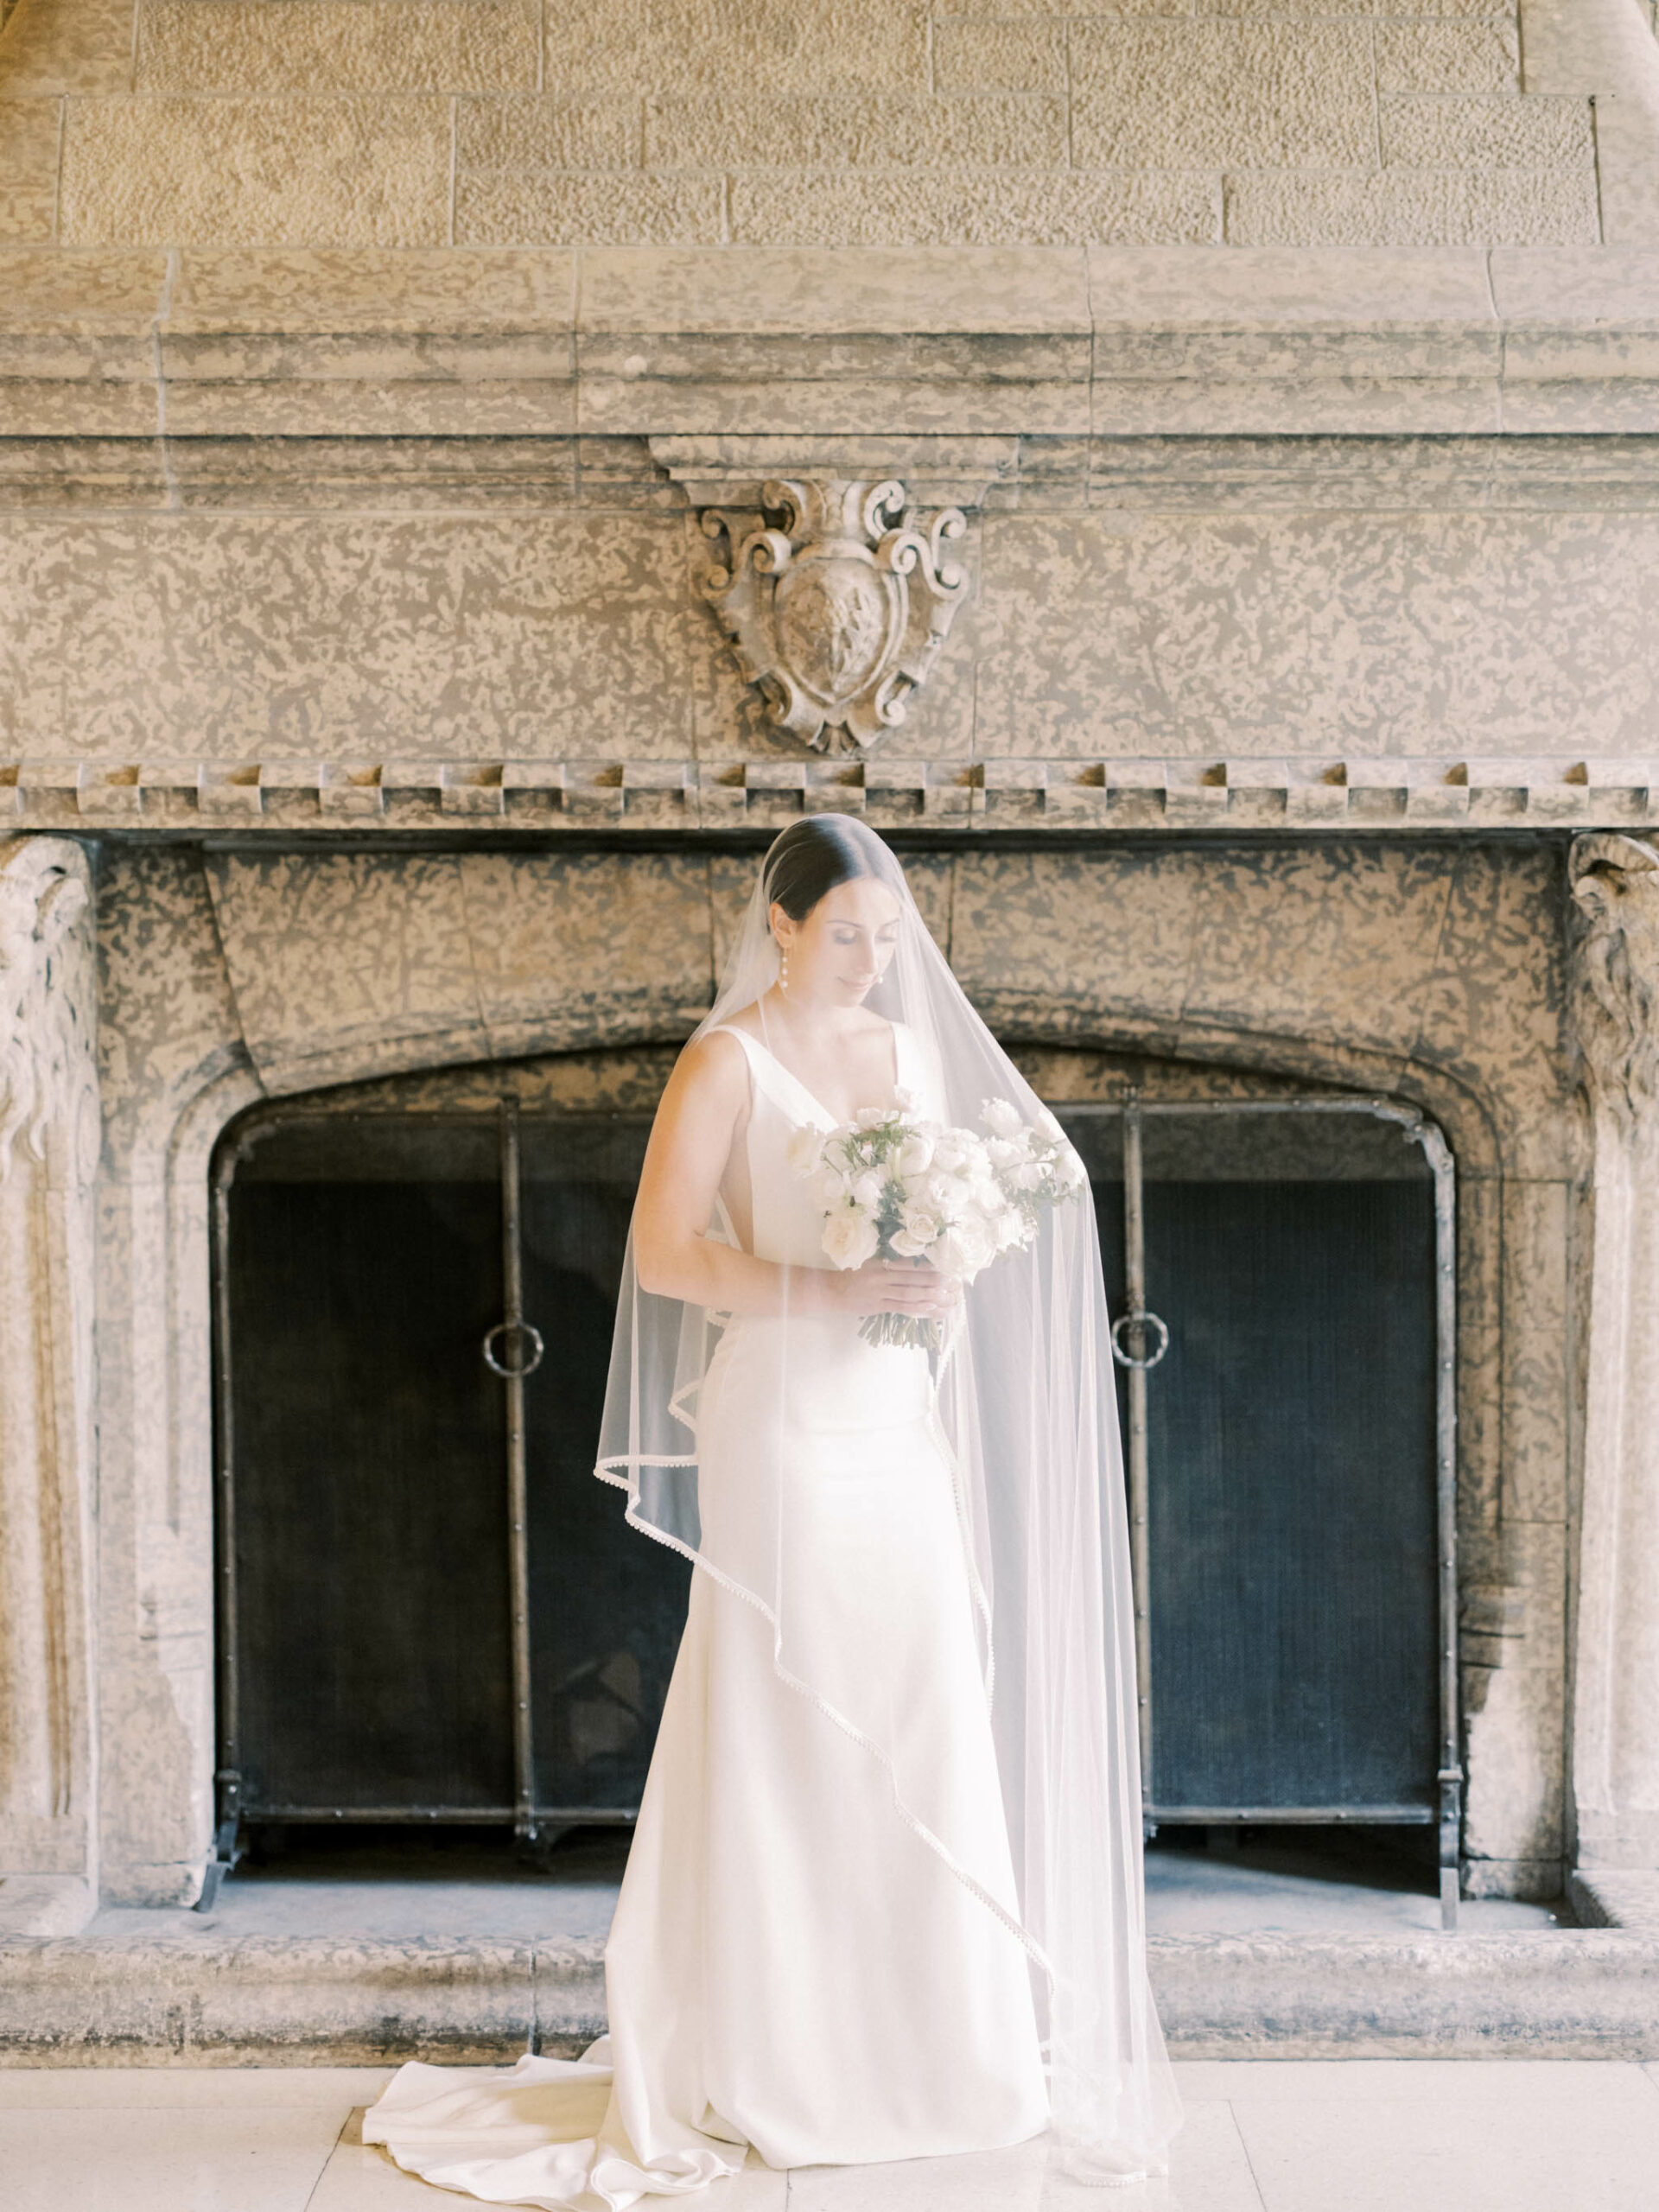 How to gift your wedding photos this holiday season, bride with veil over head, ethereal bride, fairmont banff springs wedding, nicole sarah, bride portrait, intimate portrait